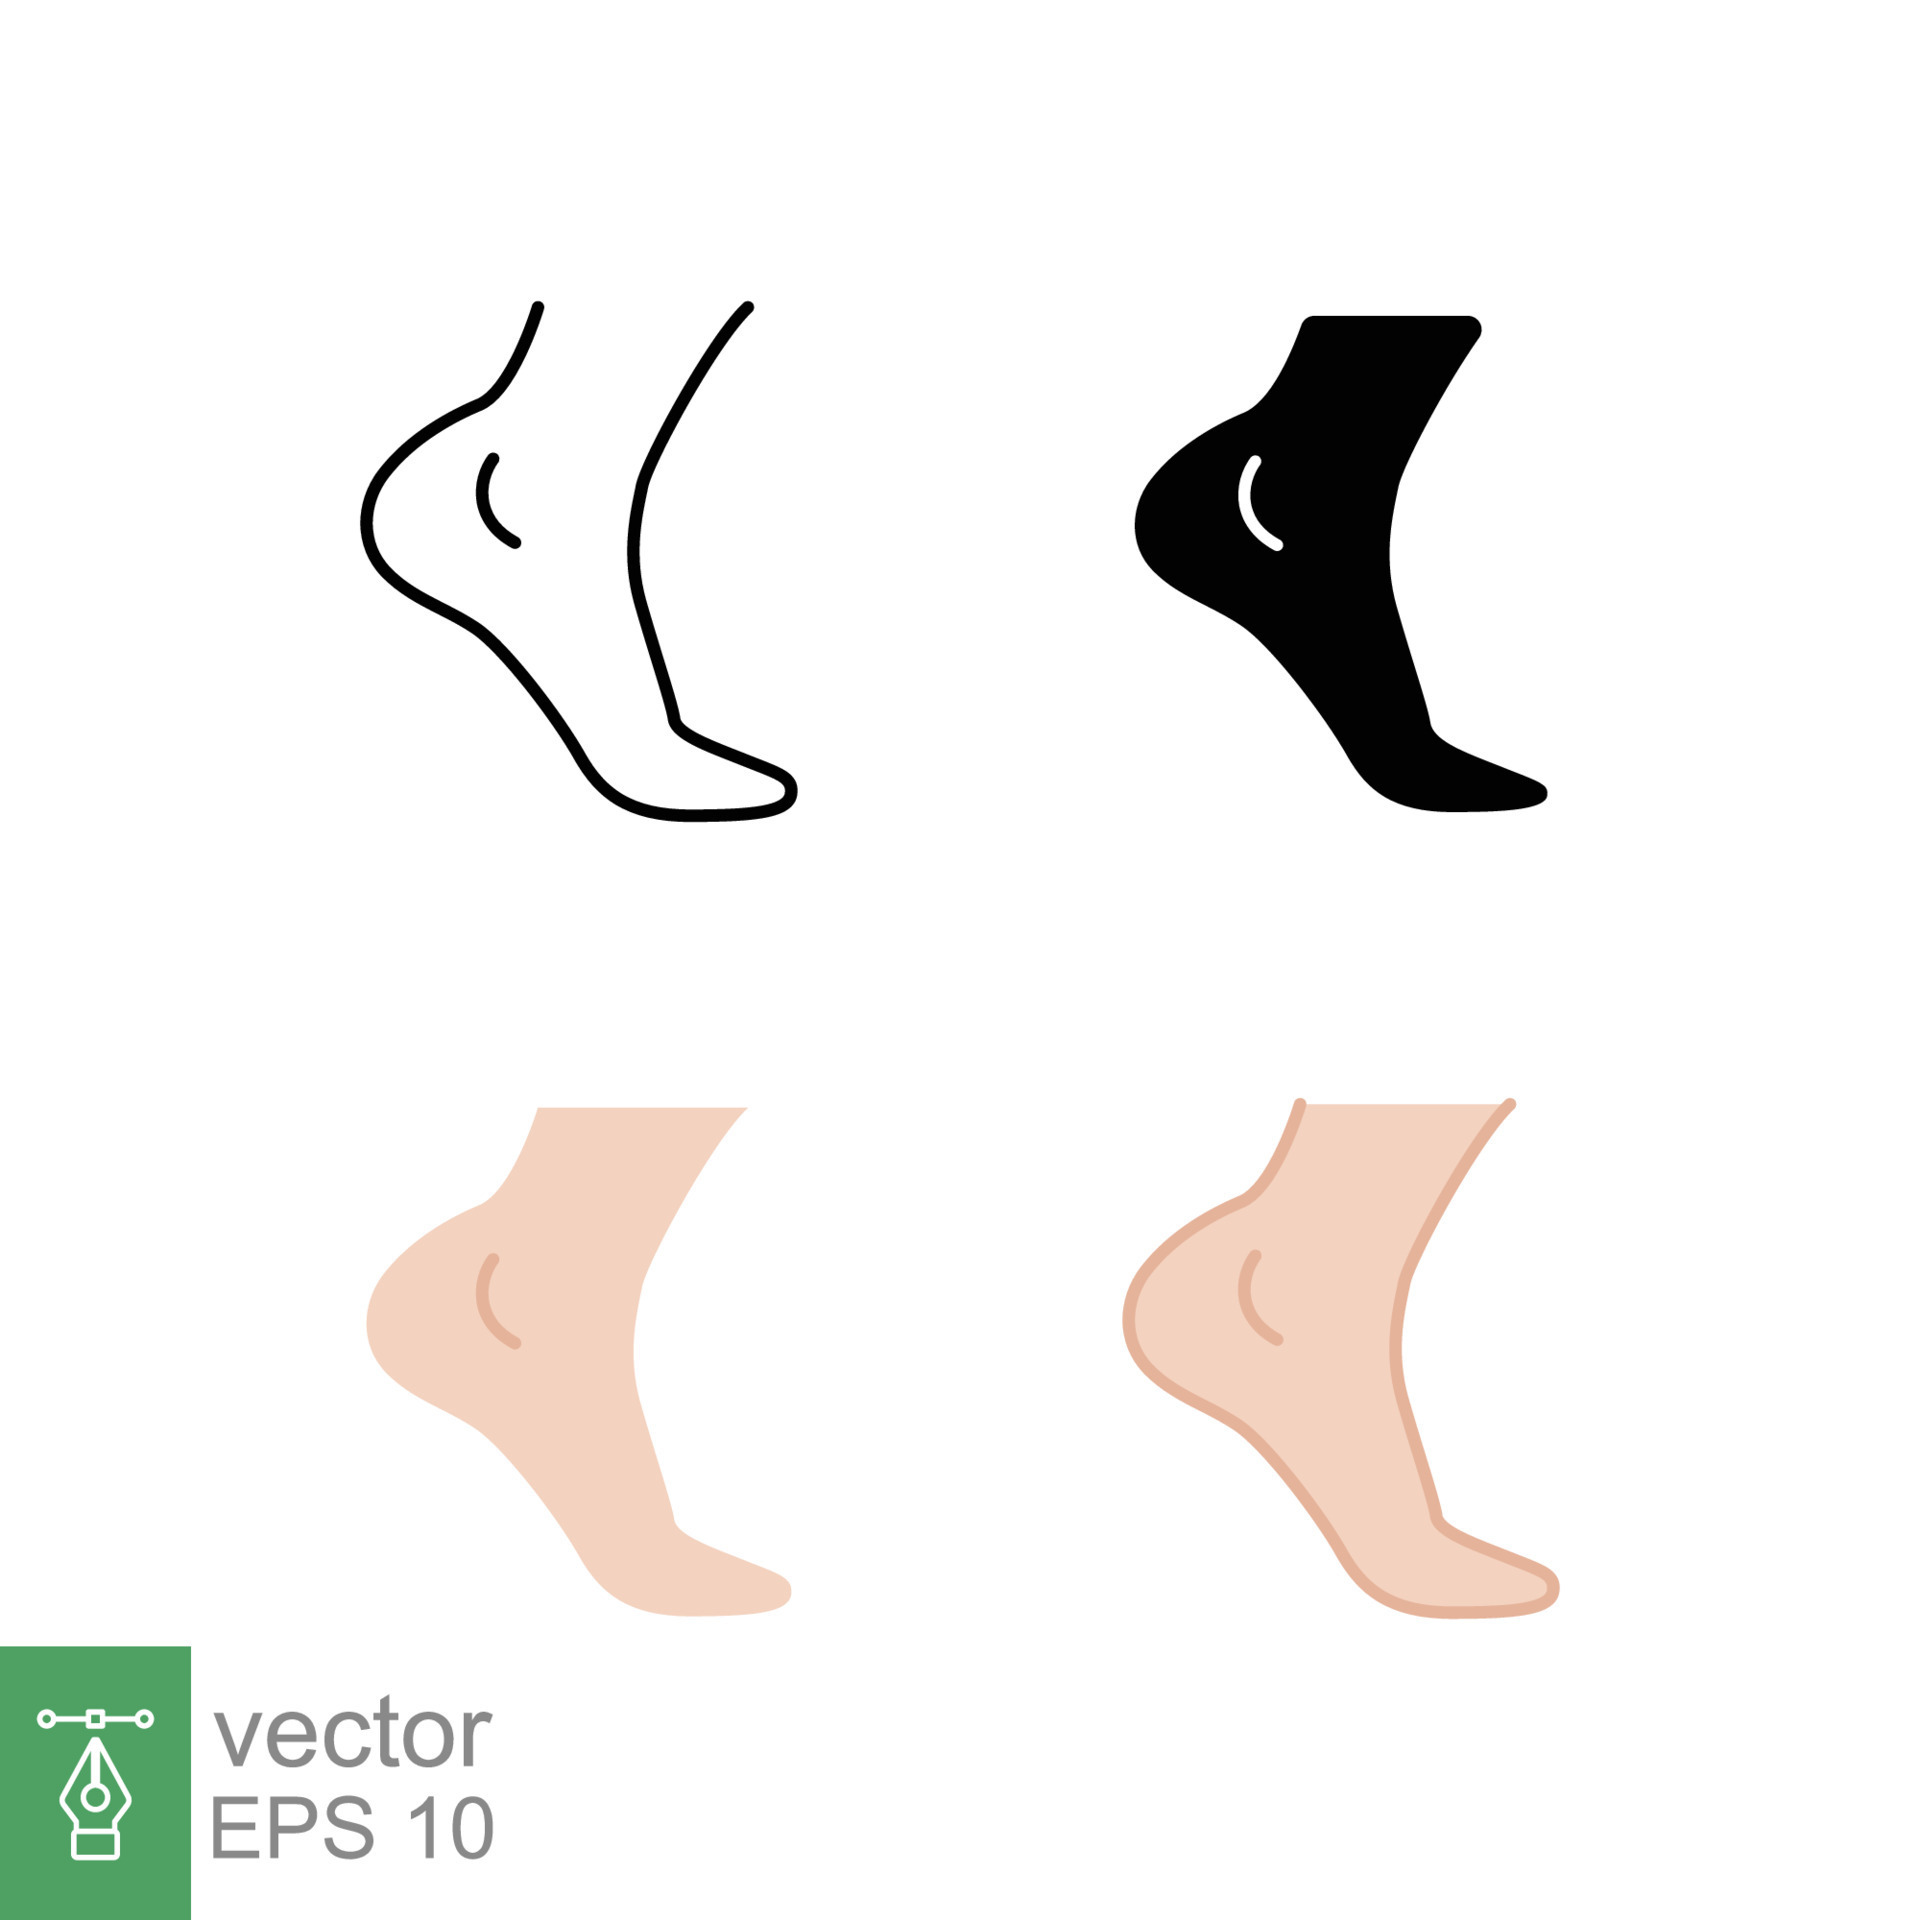 https://static.vecteezy.com/system/resources/previews/019/011/273/original/foot-ankle-icon-in-different-style-set-of-ankle-sign-icons-designed-in-filled-outline-line-glyph-and-solid-style-illustration-isolated-on-white-background-eps-10-vector.jpg